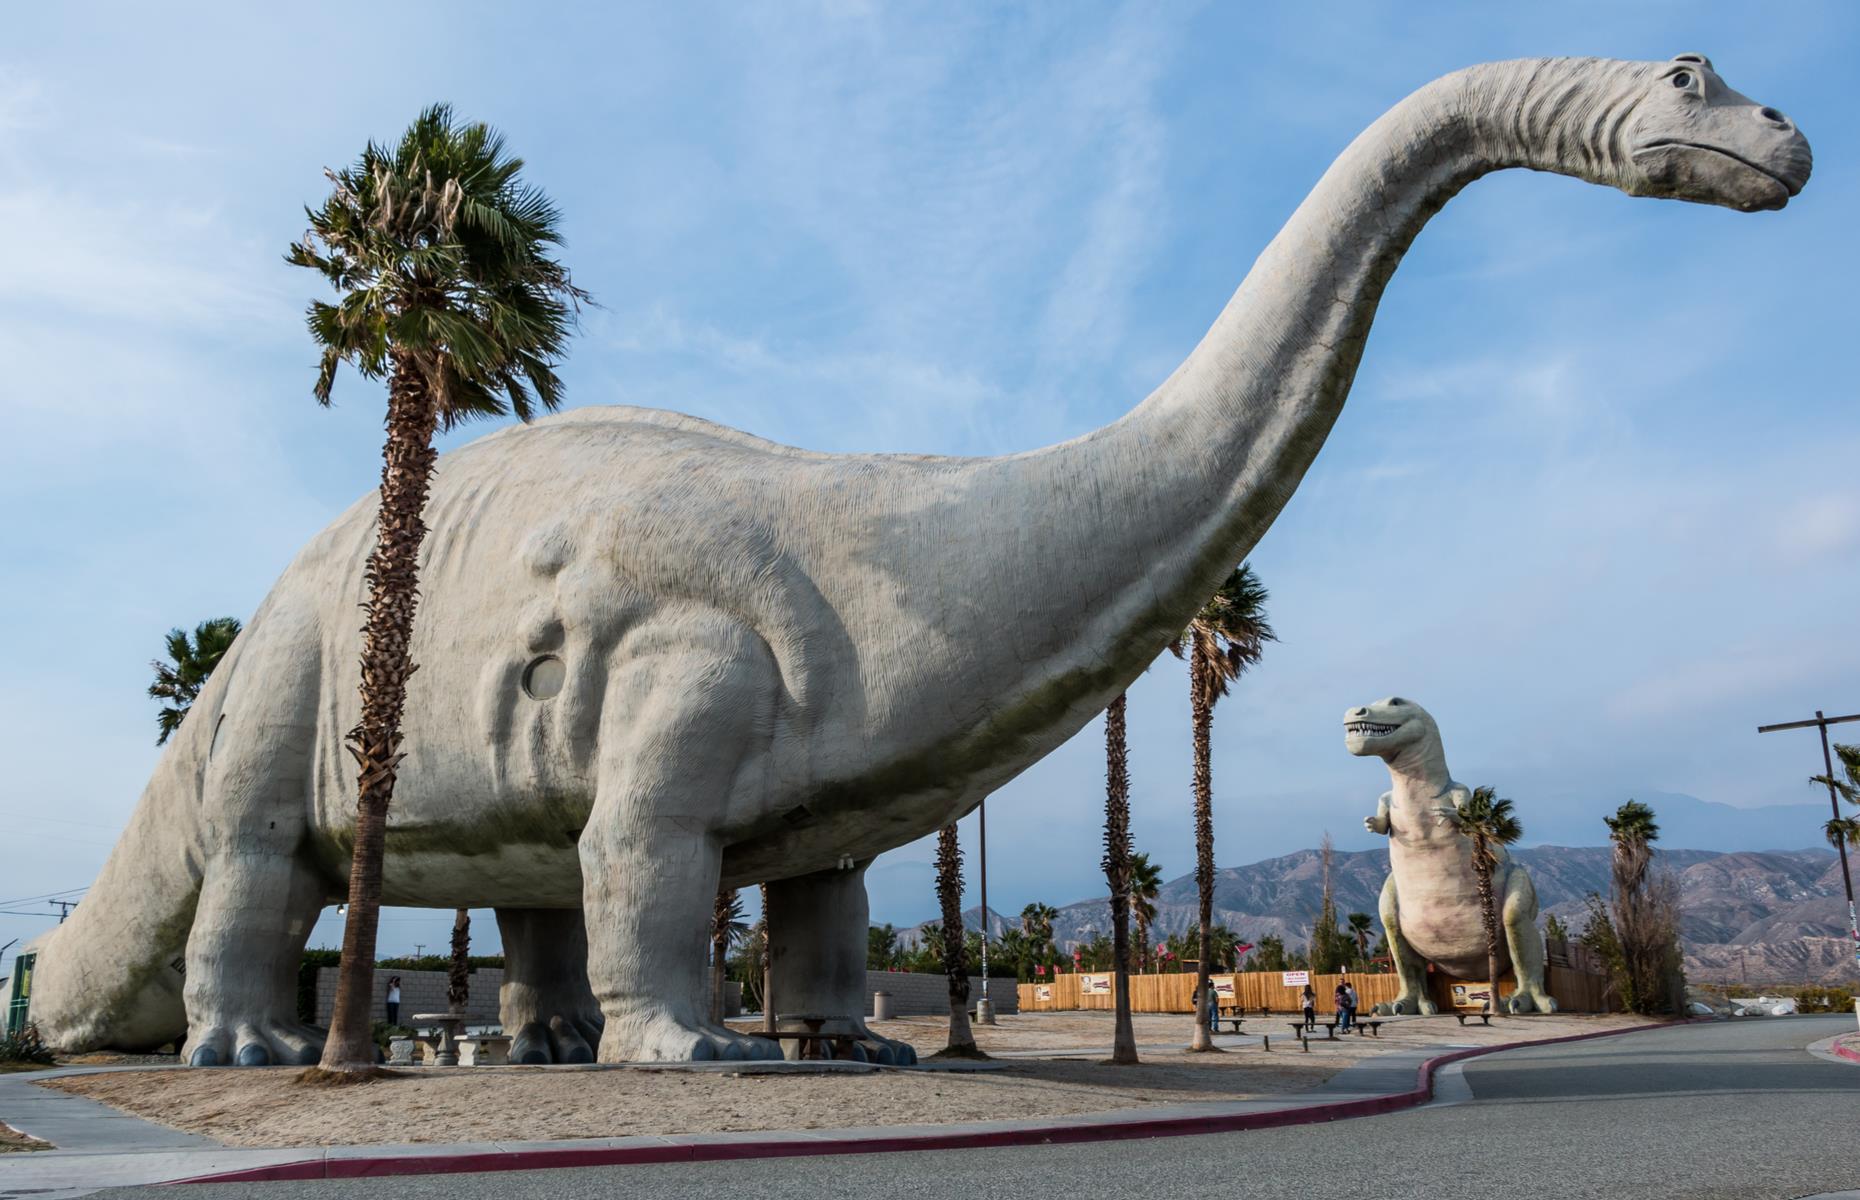 <p>The drive from city to city takes around one hour 45 minutes, but attractions en route tend to slow travelers down. There’s the Cabazon Dinosaurs (pictured), a quirky roadside amusement famed for its giant robotic dinosaurs. There’s also the San Gorgonio Pass, a particularly striking stretch of roadway with mountain views and a large wind farm. Palm Springs itself is famed for its resorts and its panorama-wielding aerial tramway (the tramway is temporarily closed – <a href="https://pstramway.com/">have a look at the website for updates</a>). </p>